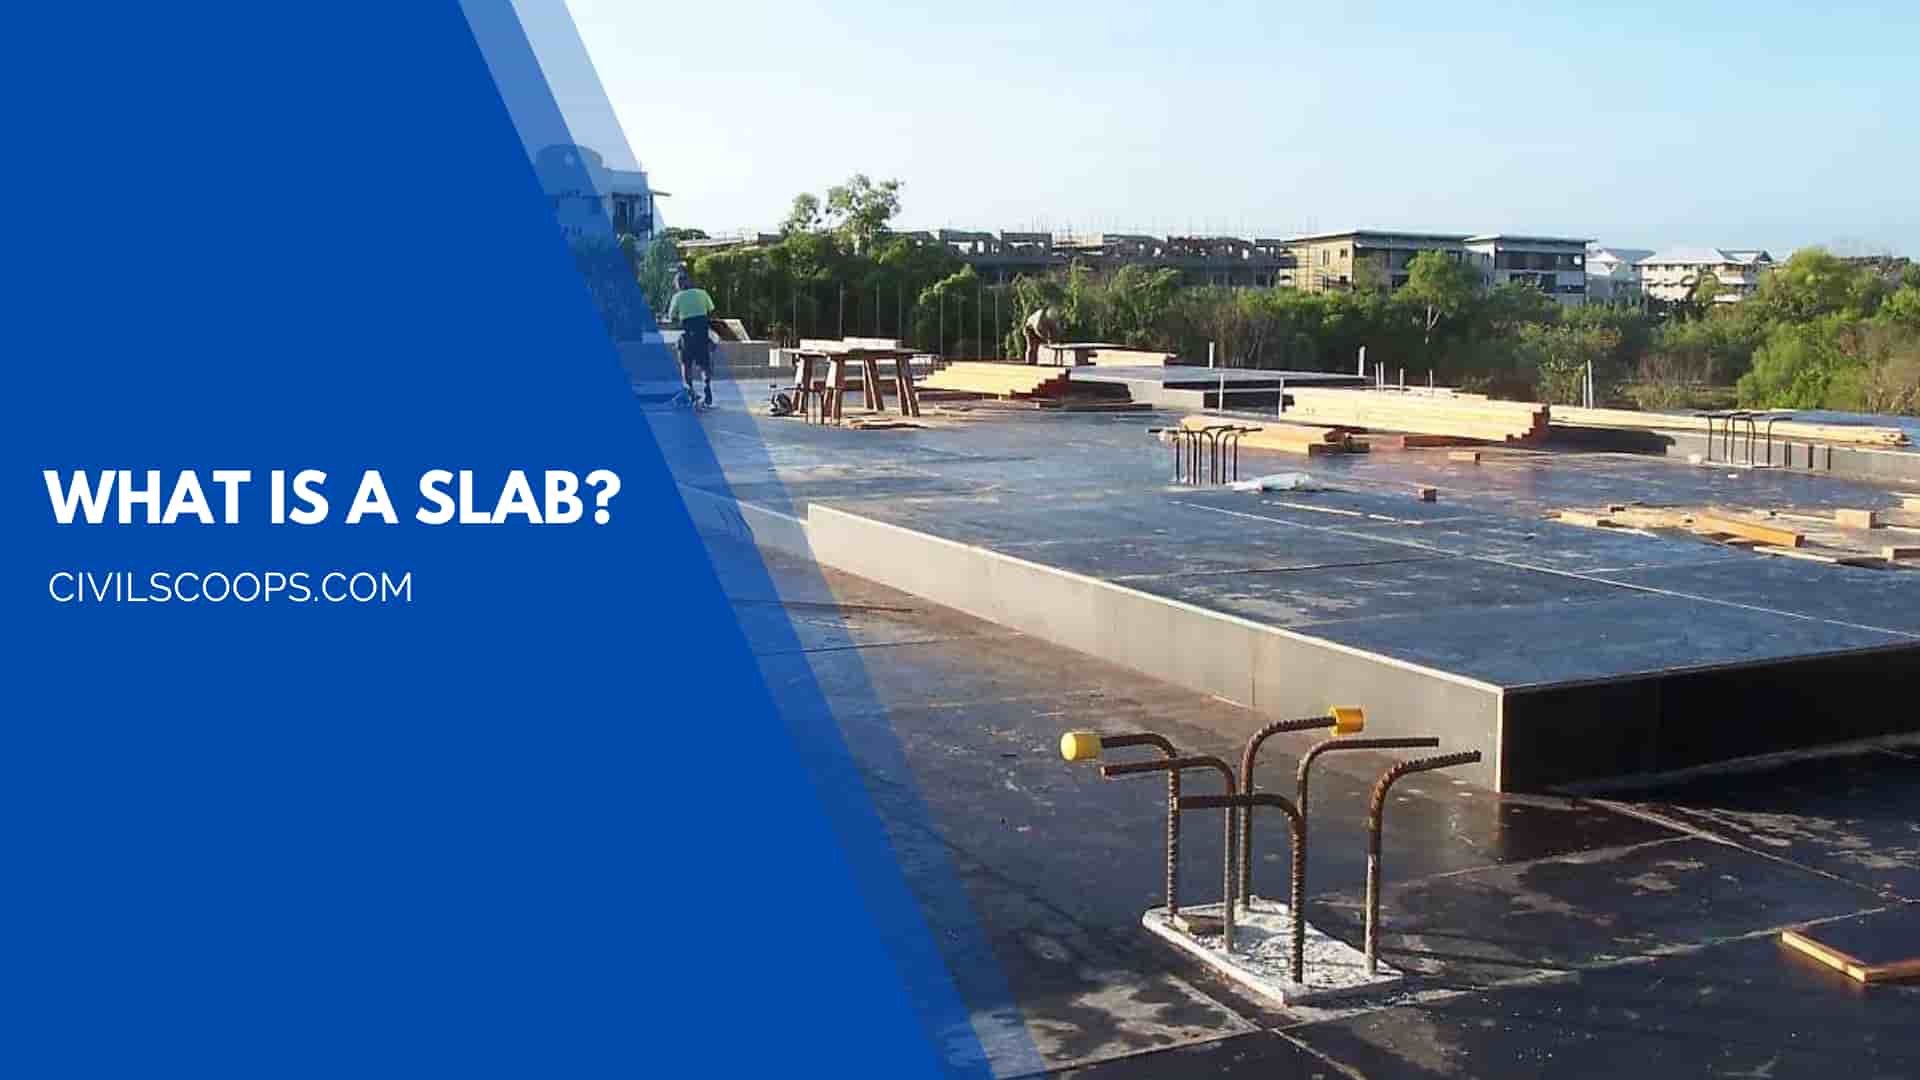 What Is a Slab